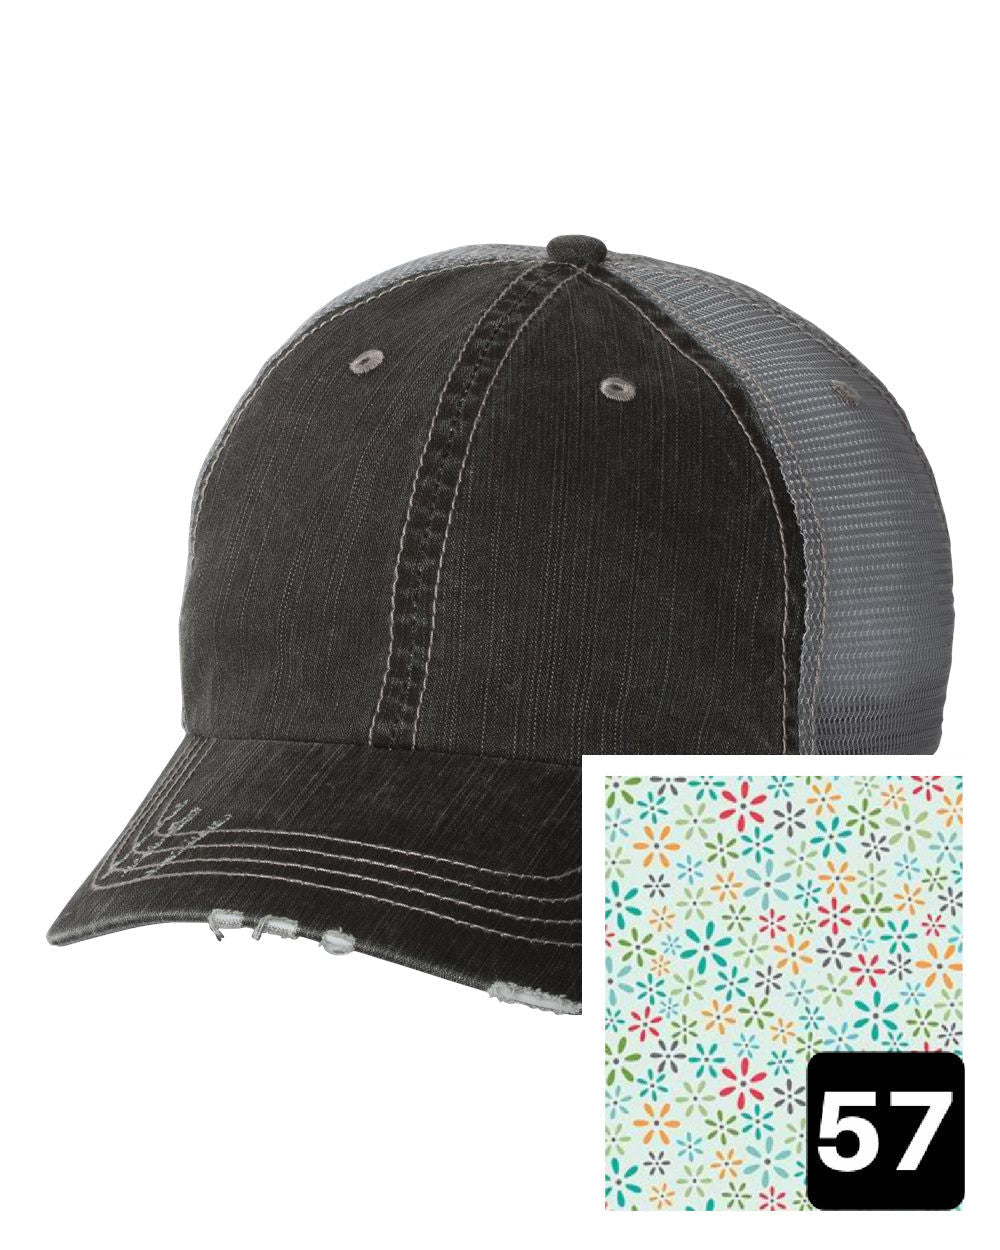 gray distressed trucker hat with white daisy on yellow fabric state of Wisconsin